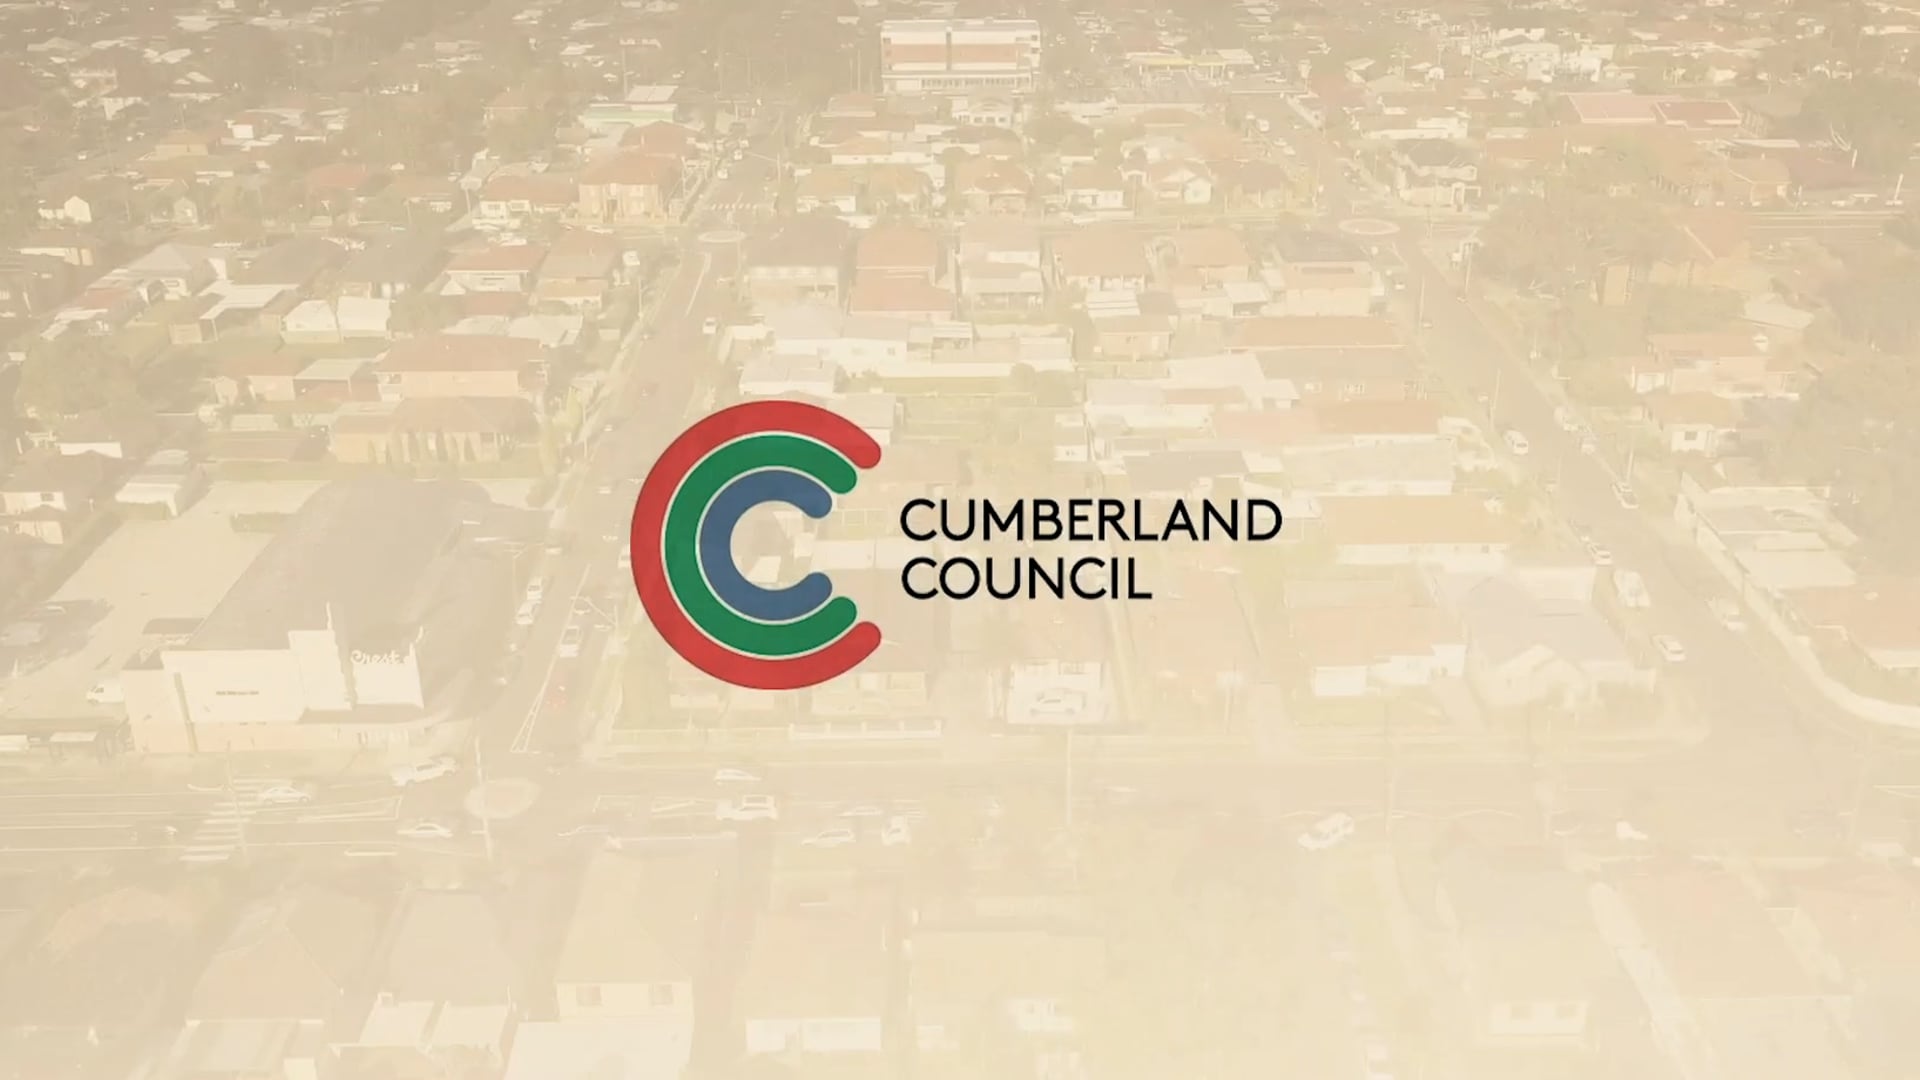 Cumberland Council - "Our Services"